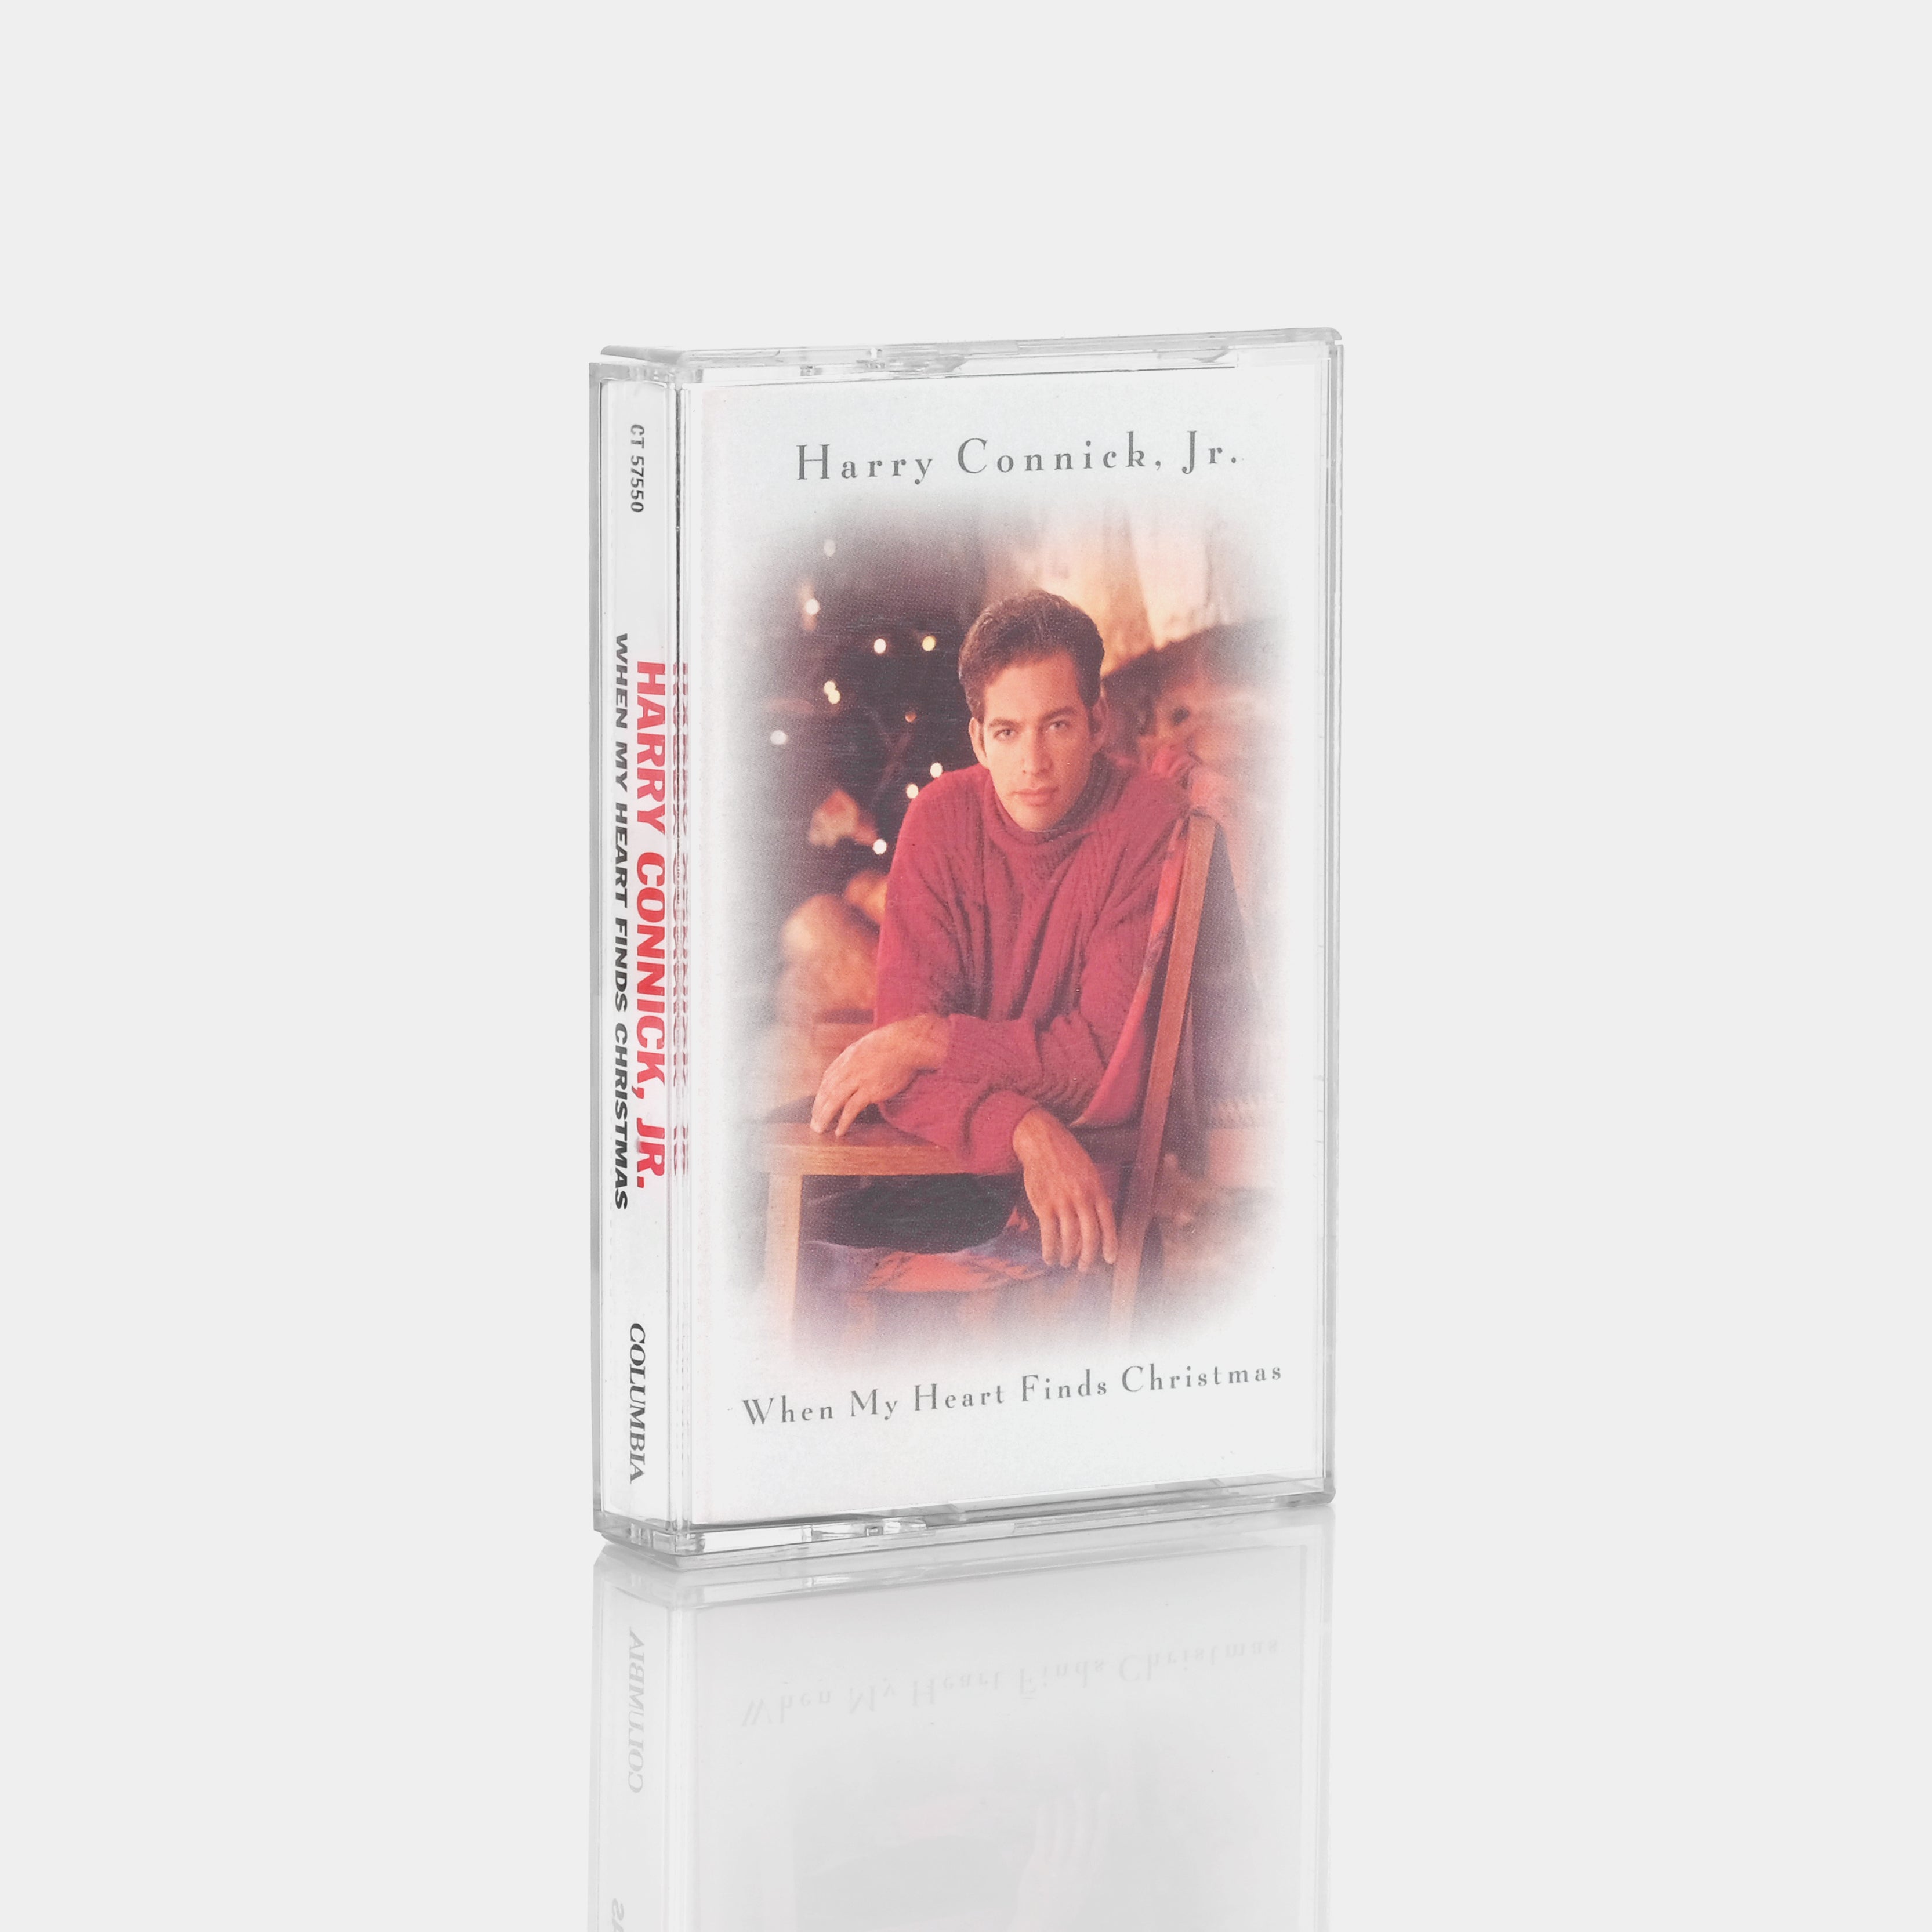 Harry Connick, Jr. - When My Heart Finds Christmas Cassette Tape